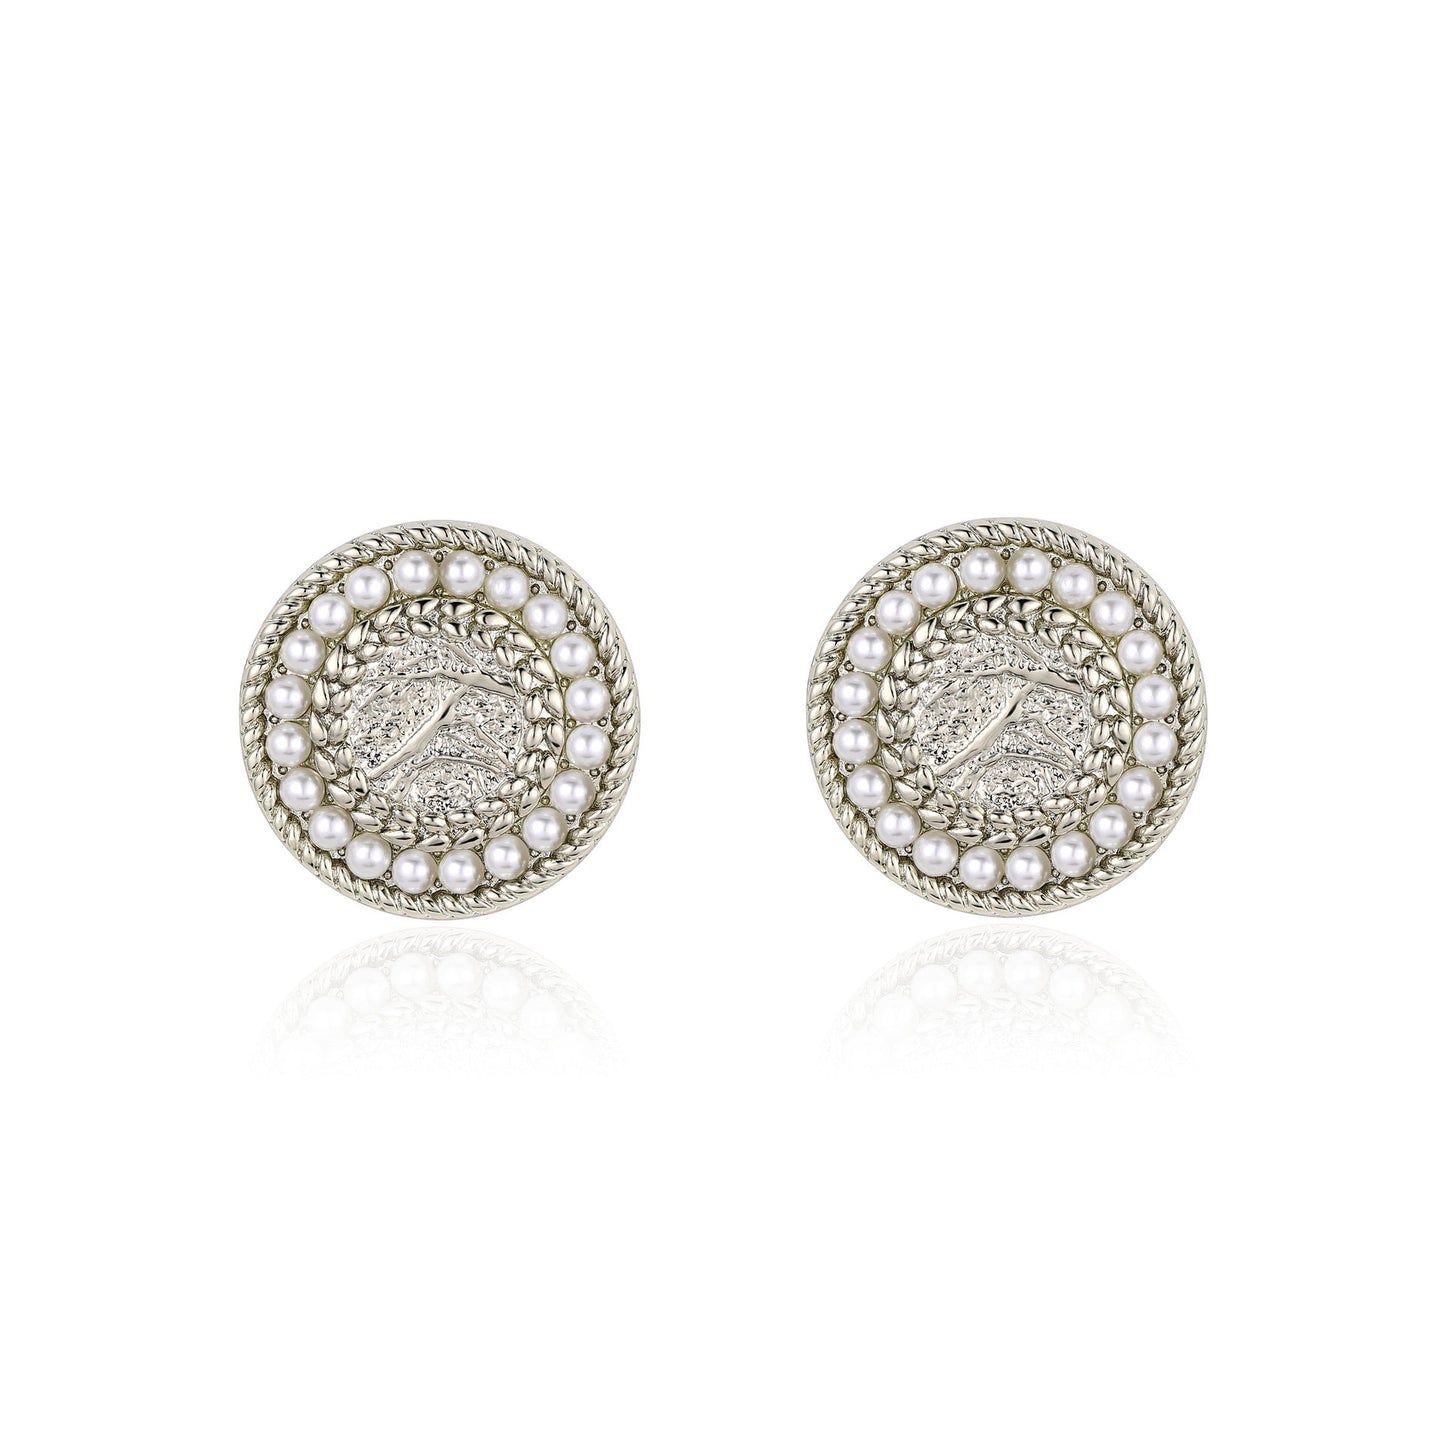 French designer's Italian style collection is elegant, fashionable, sophisticated, luxurious, and niche design earrings for women